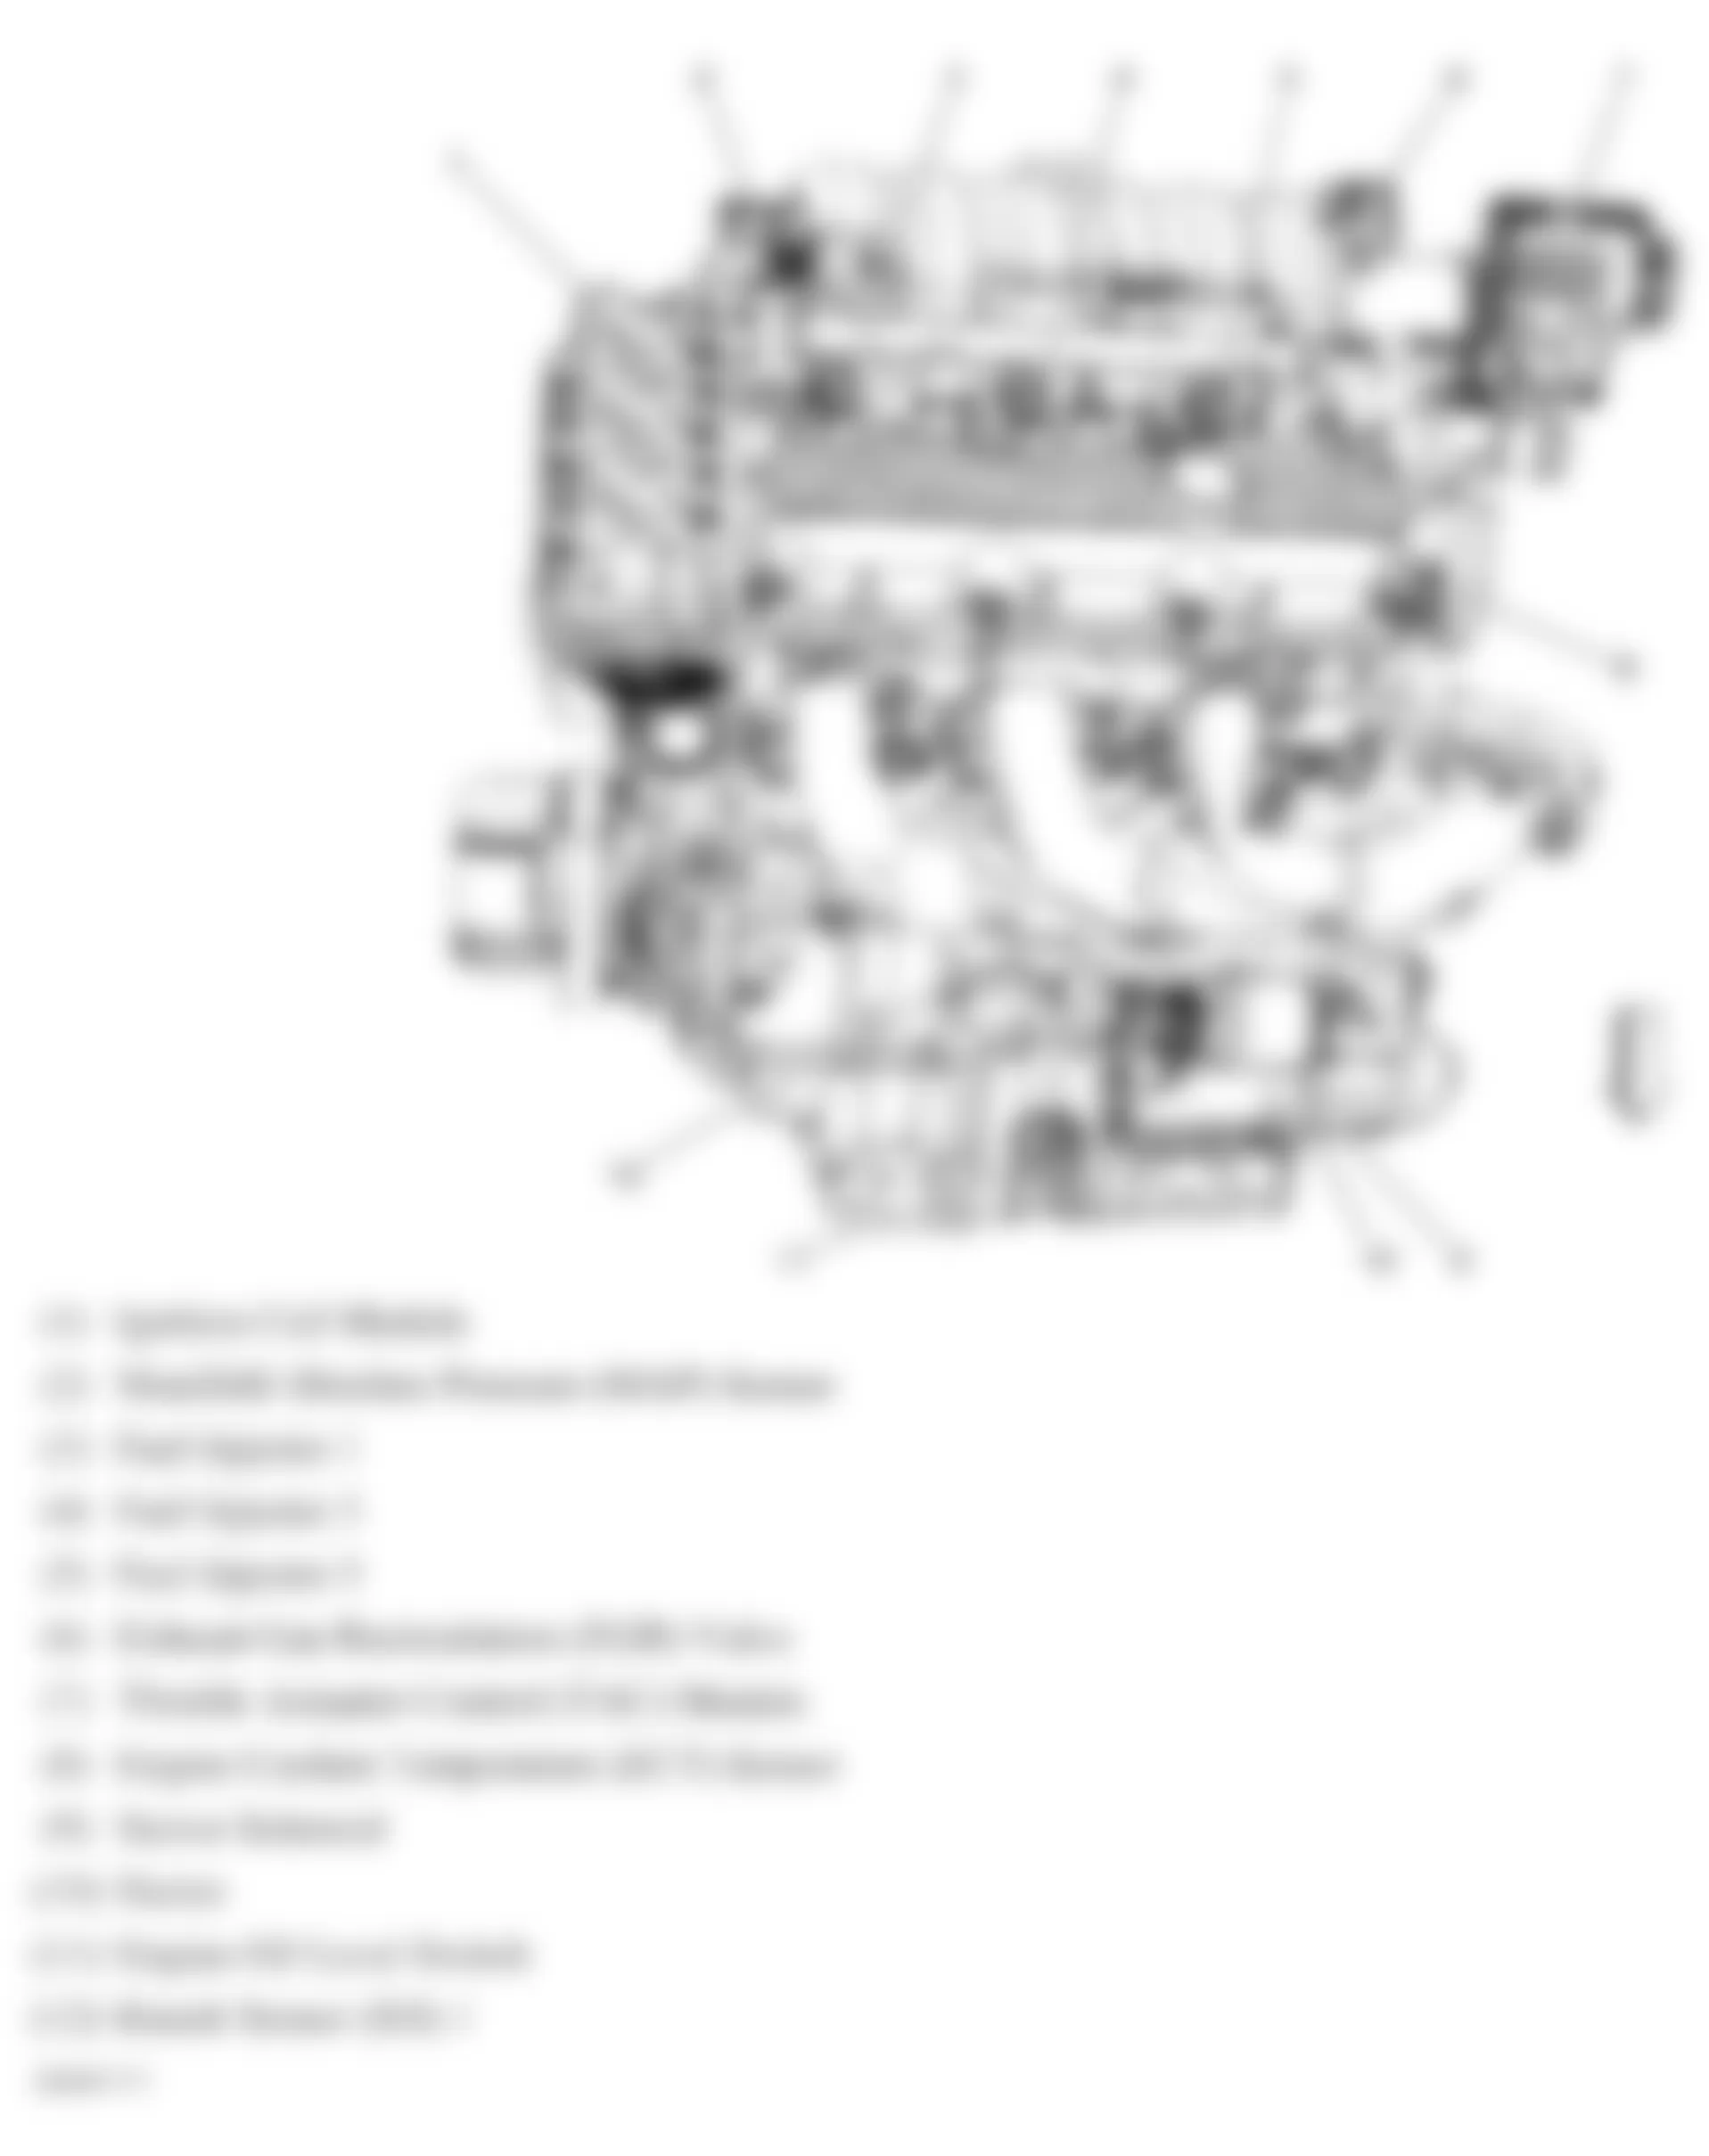 Buick LaCrosse CXL 2008 - Component Locations -  Left Side Of Engine (3.8L)